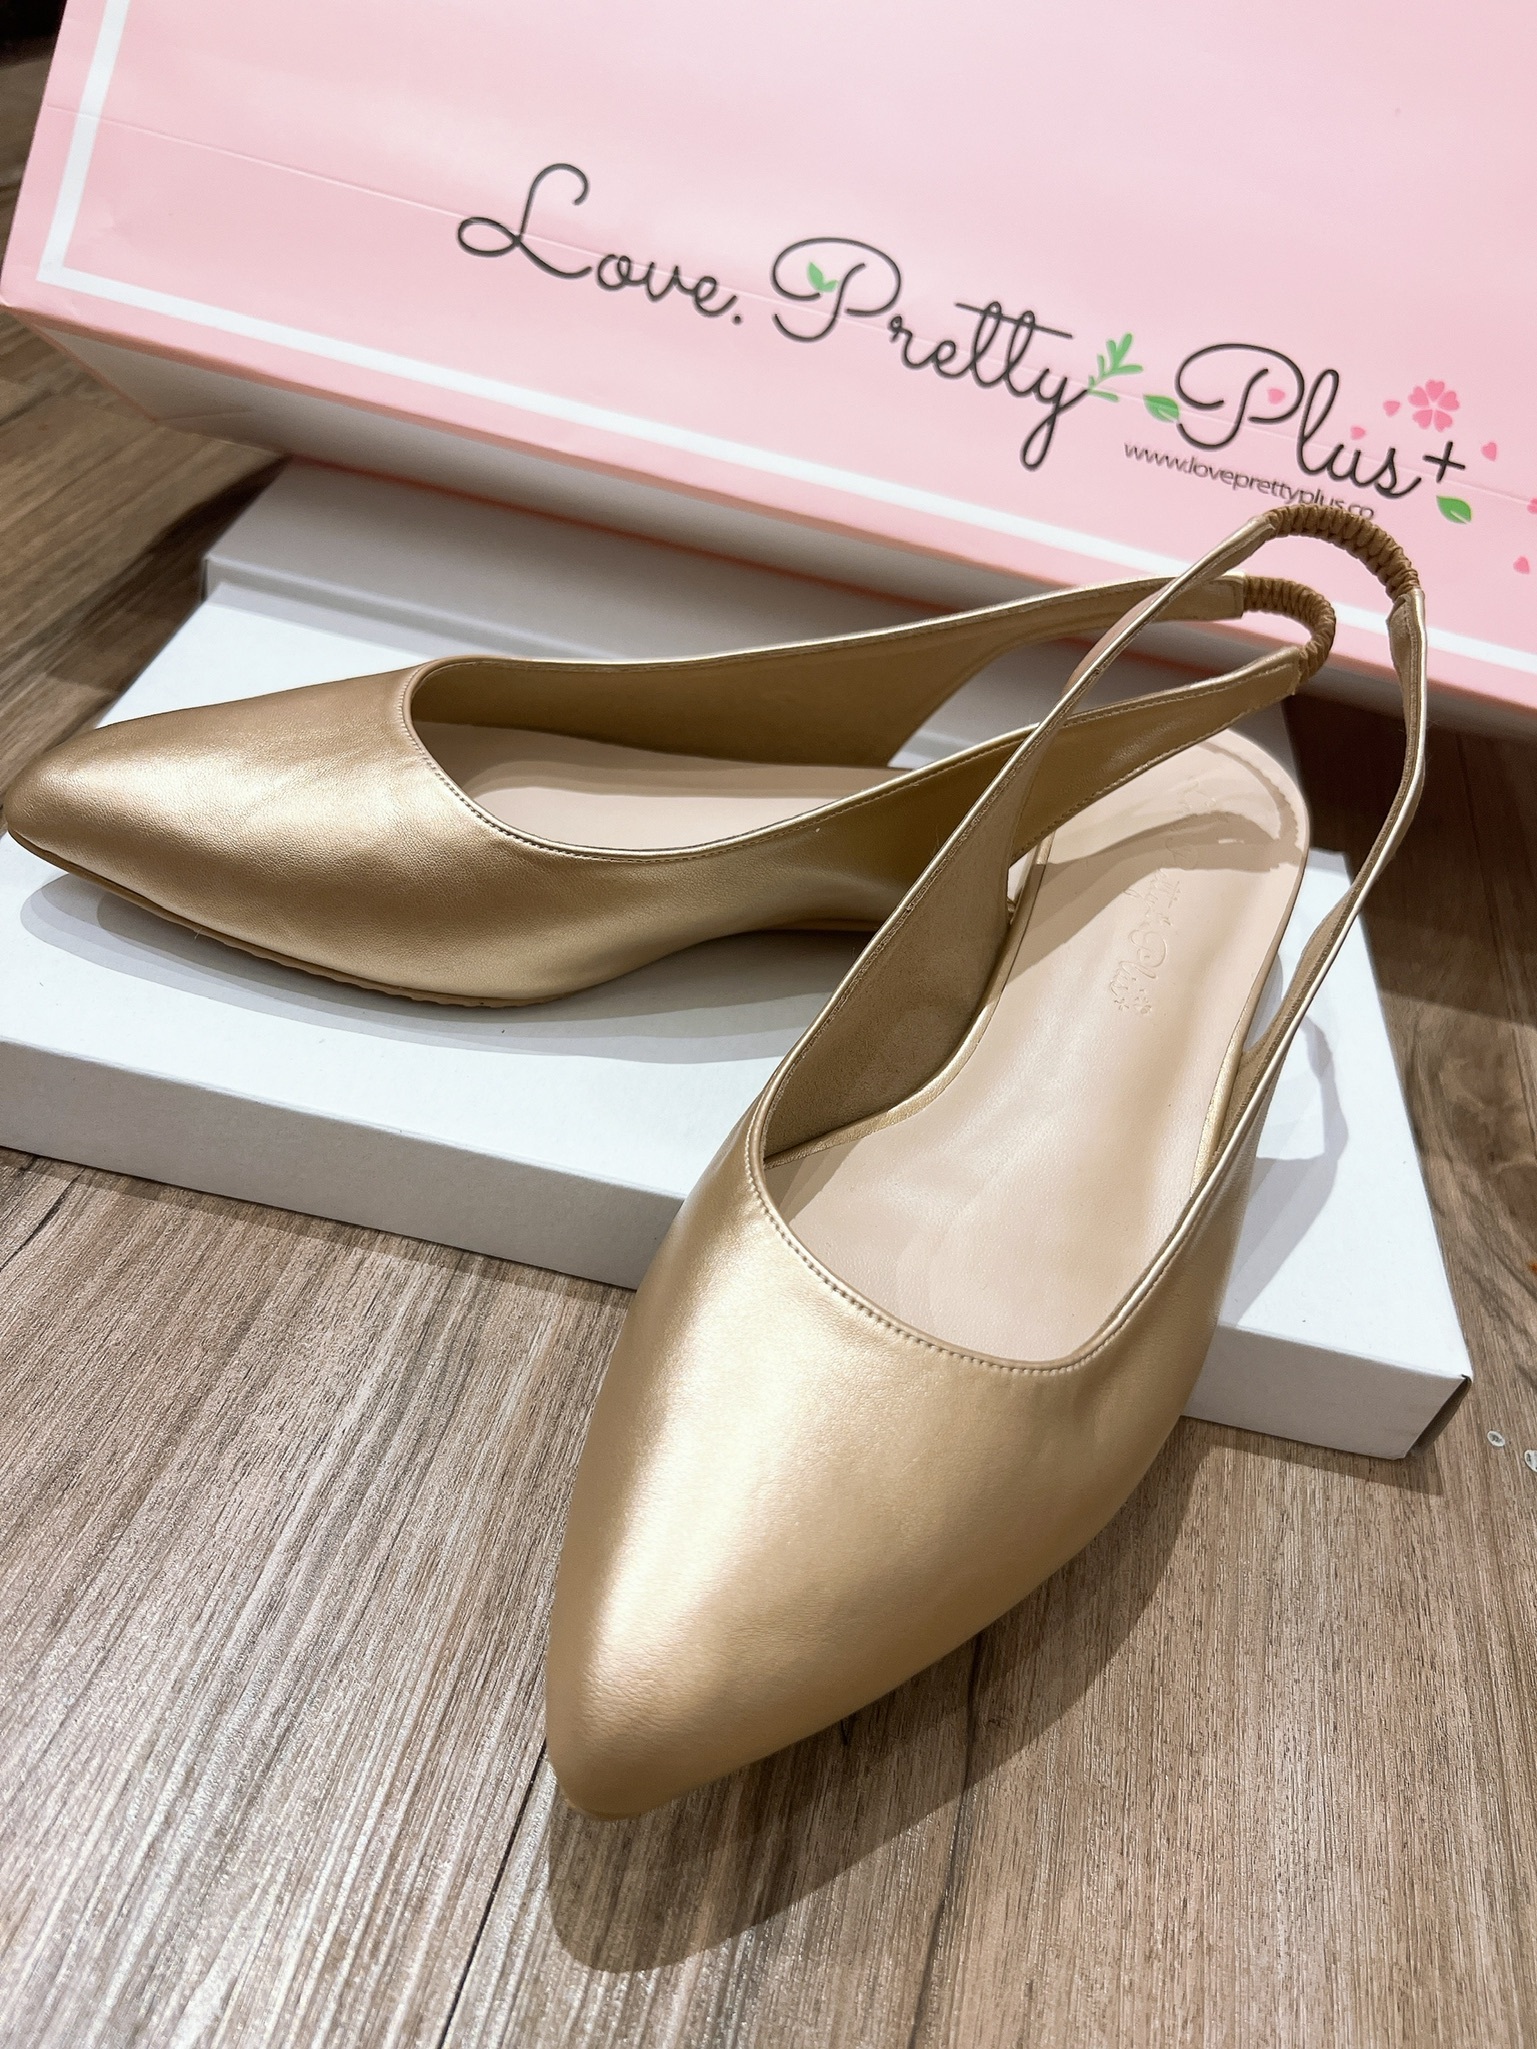 Love+ Zola Gold Sling Back Shoes | LPP06 |2 Colors